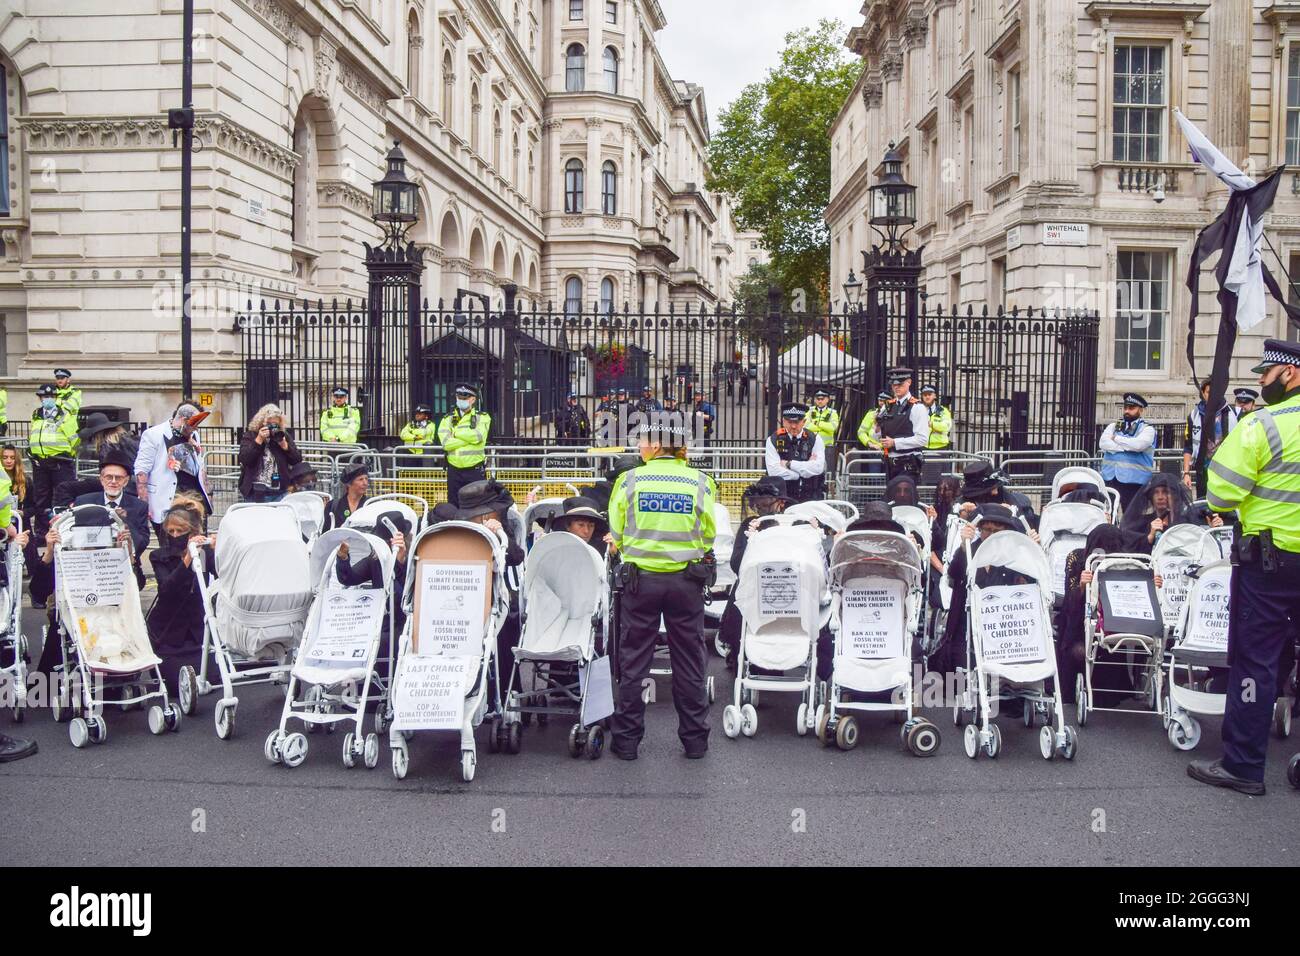 London, UK. 31st Aug, 2021. Protesters attach themselves to prams outside Downing Street during the Pram Rebellion.Extinction Rebellion protesters dressed in black marched with prams in Westminster as part of their two-week Impossible Rebellion campaign, calling on the UK Government to act meaningfully on the climate and ecological crisis. Credit: SOPA Images Limited/Alamy Live News Stock Photo